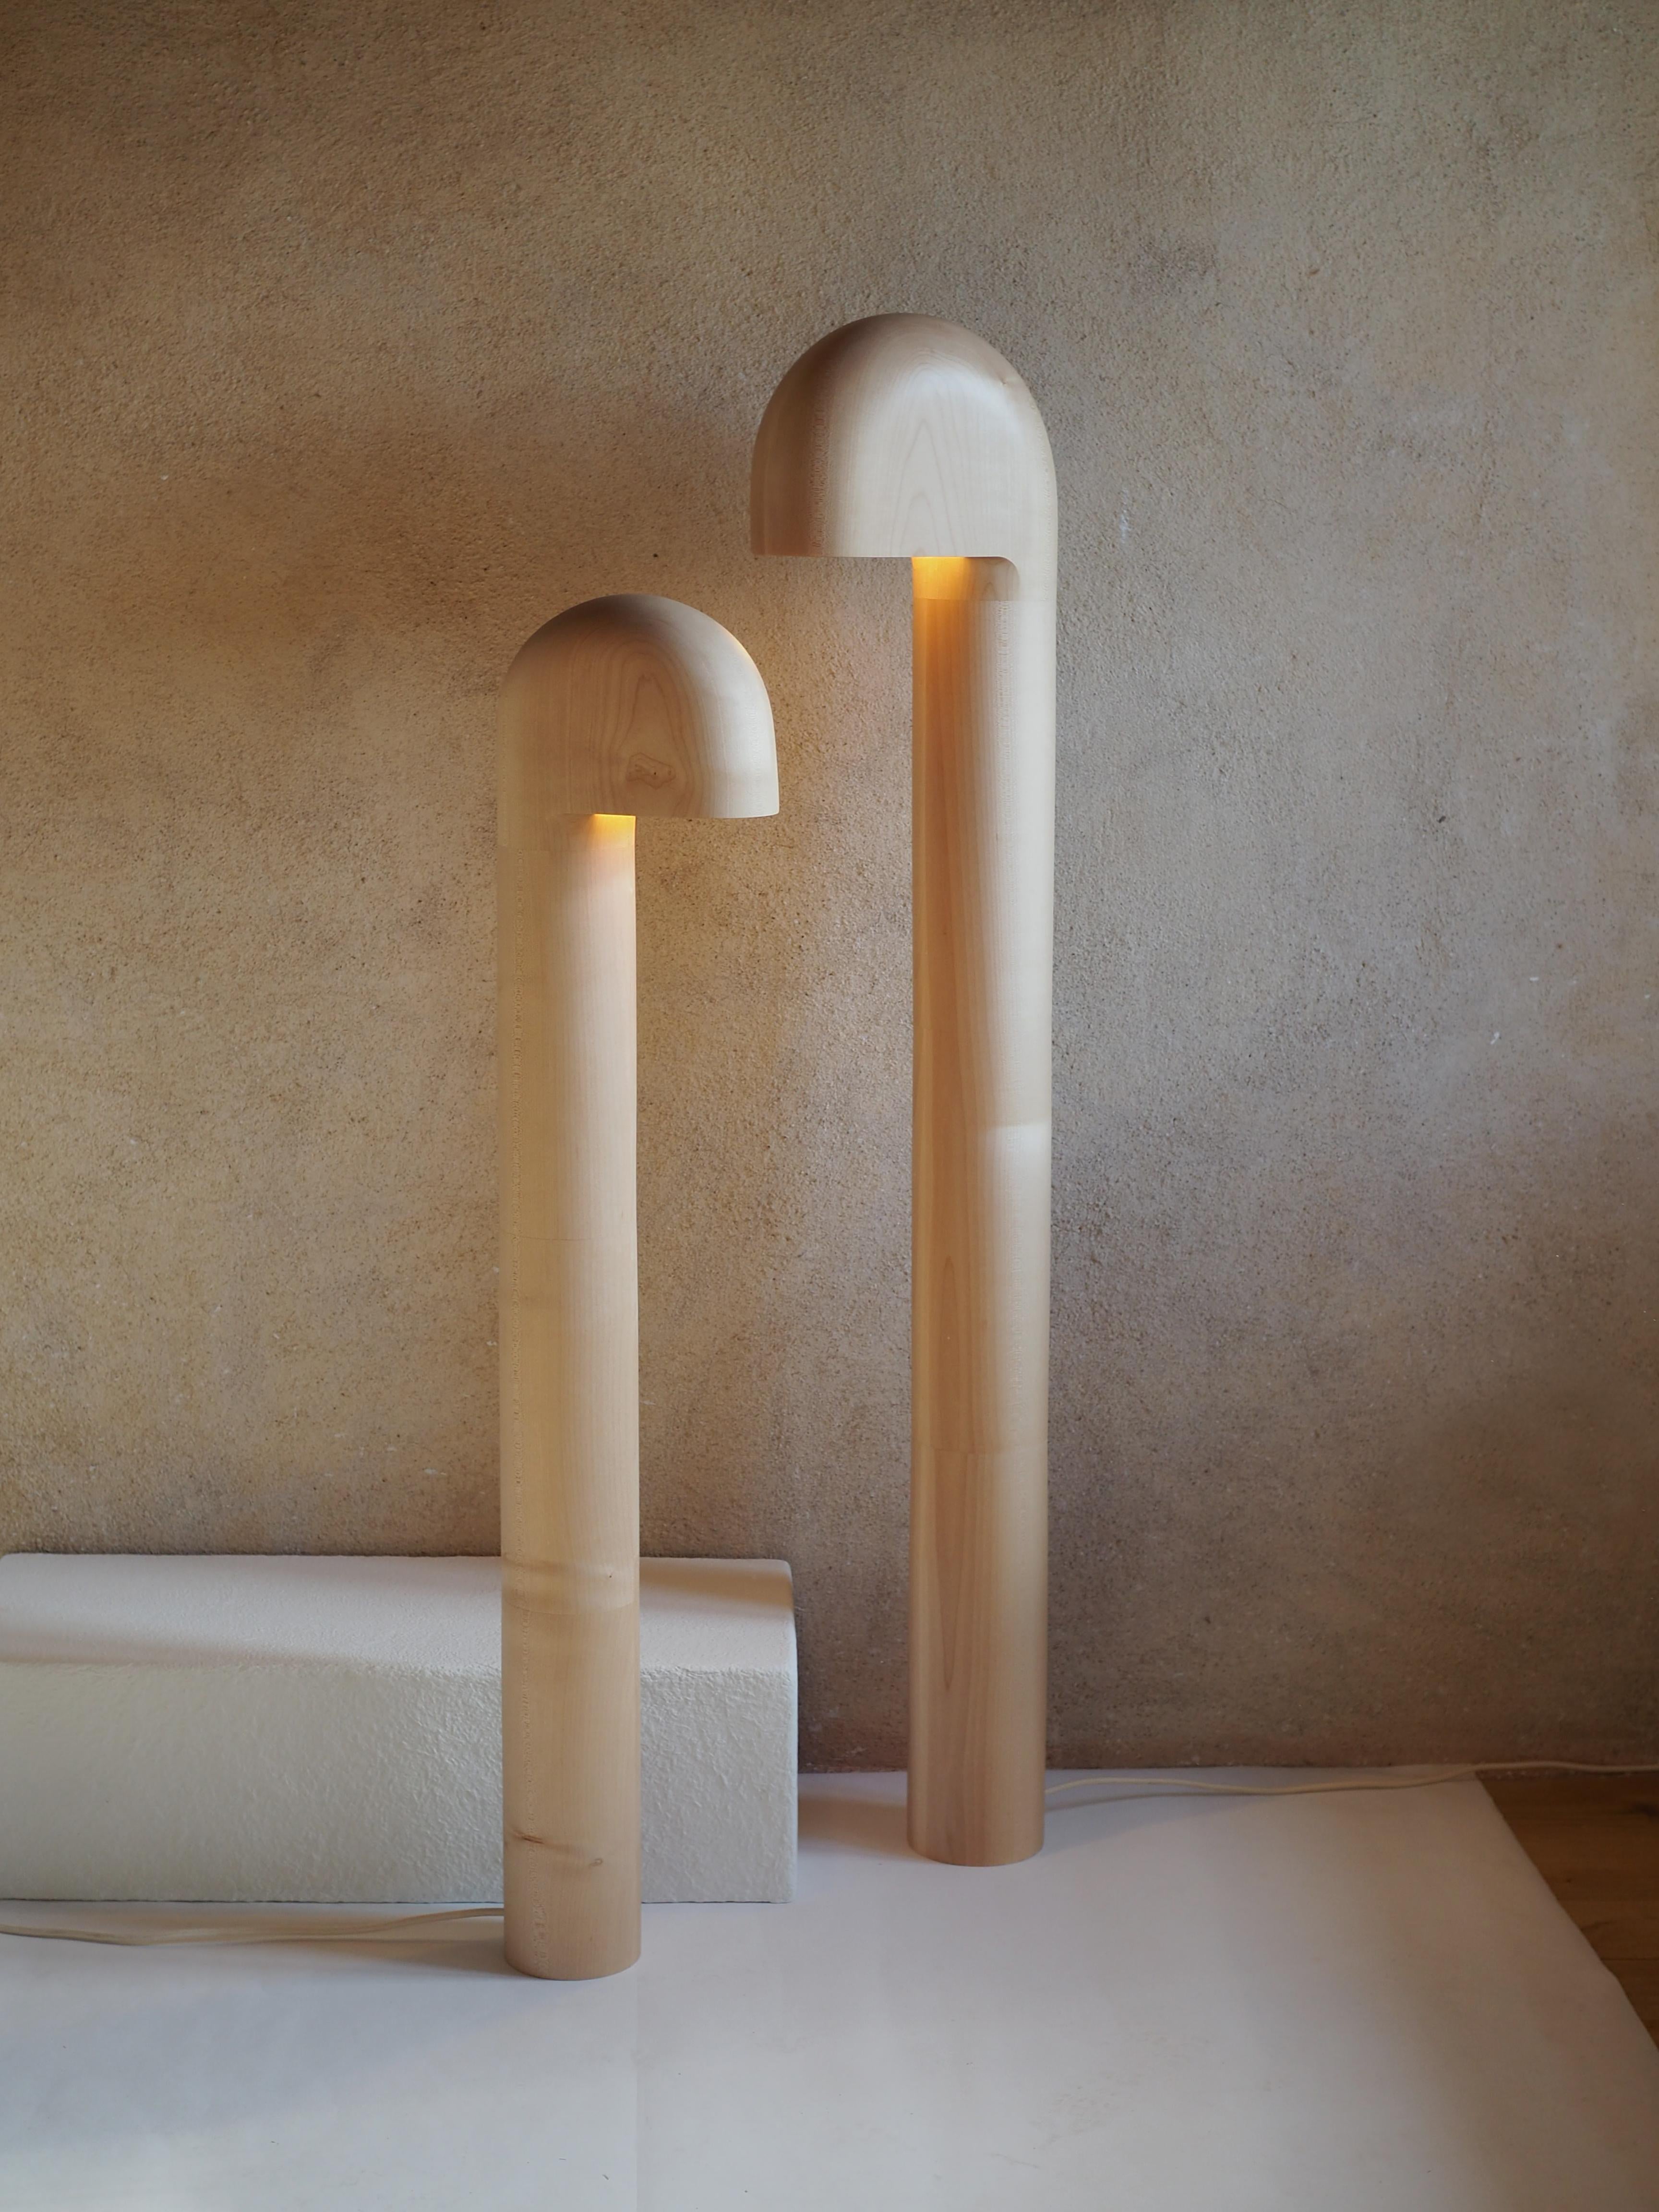 Set Of 2 Sycamore Maple Lampadaire Floor Lamps by Pauline Pietri
Unique Pieces.
Dimensions: Large: Ø 120 x H 280 cm. 
Small: Ø 110 x H 230 cm. 
Materials: Sycamore maple and natural oil.

All our lamps can be wired according to each country. If sold